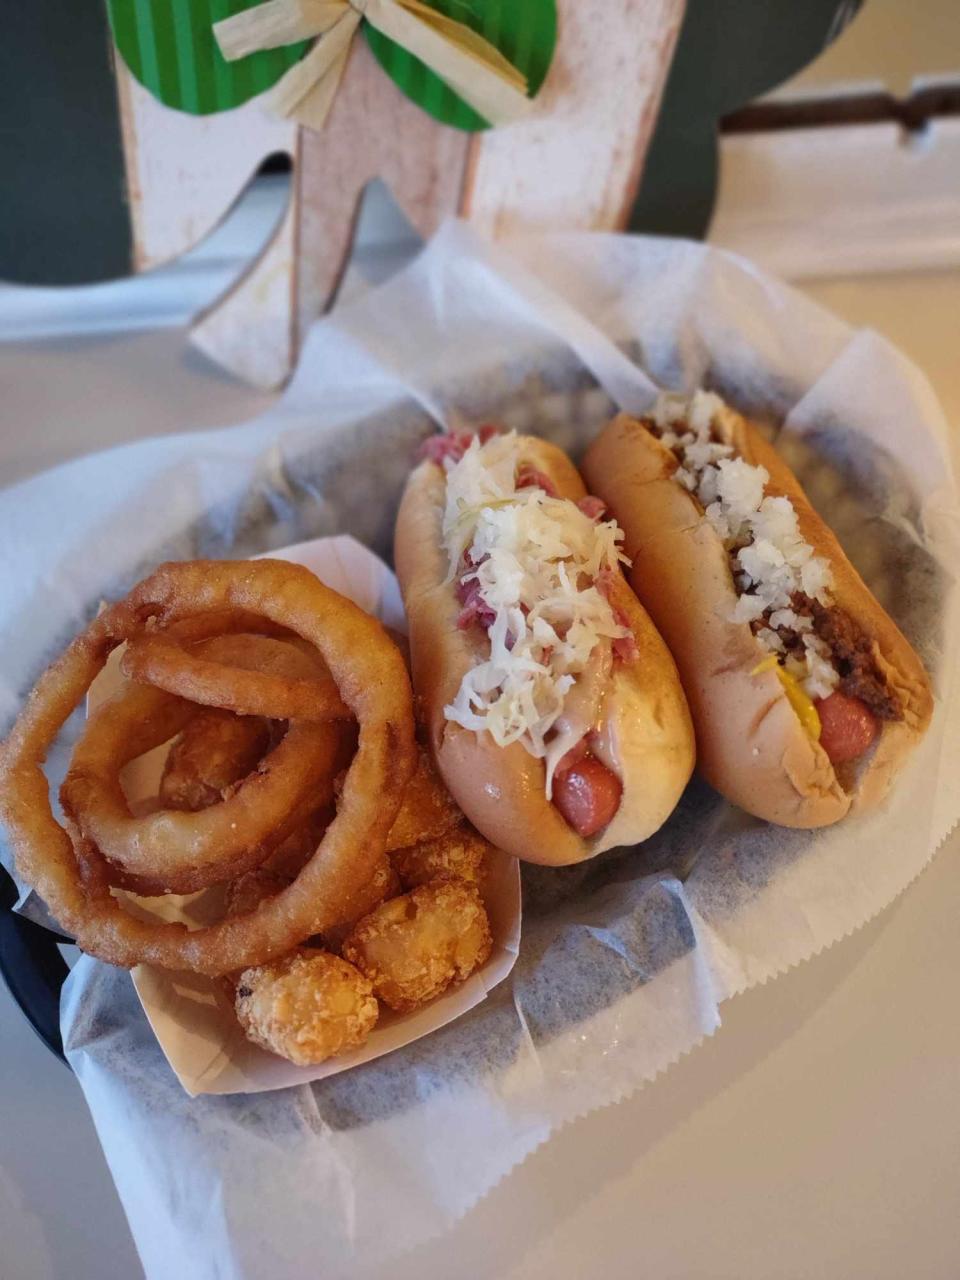 Corned beef reuben dogs at County Fare, 937 County St., Somerset.